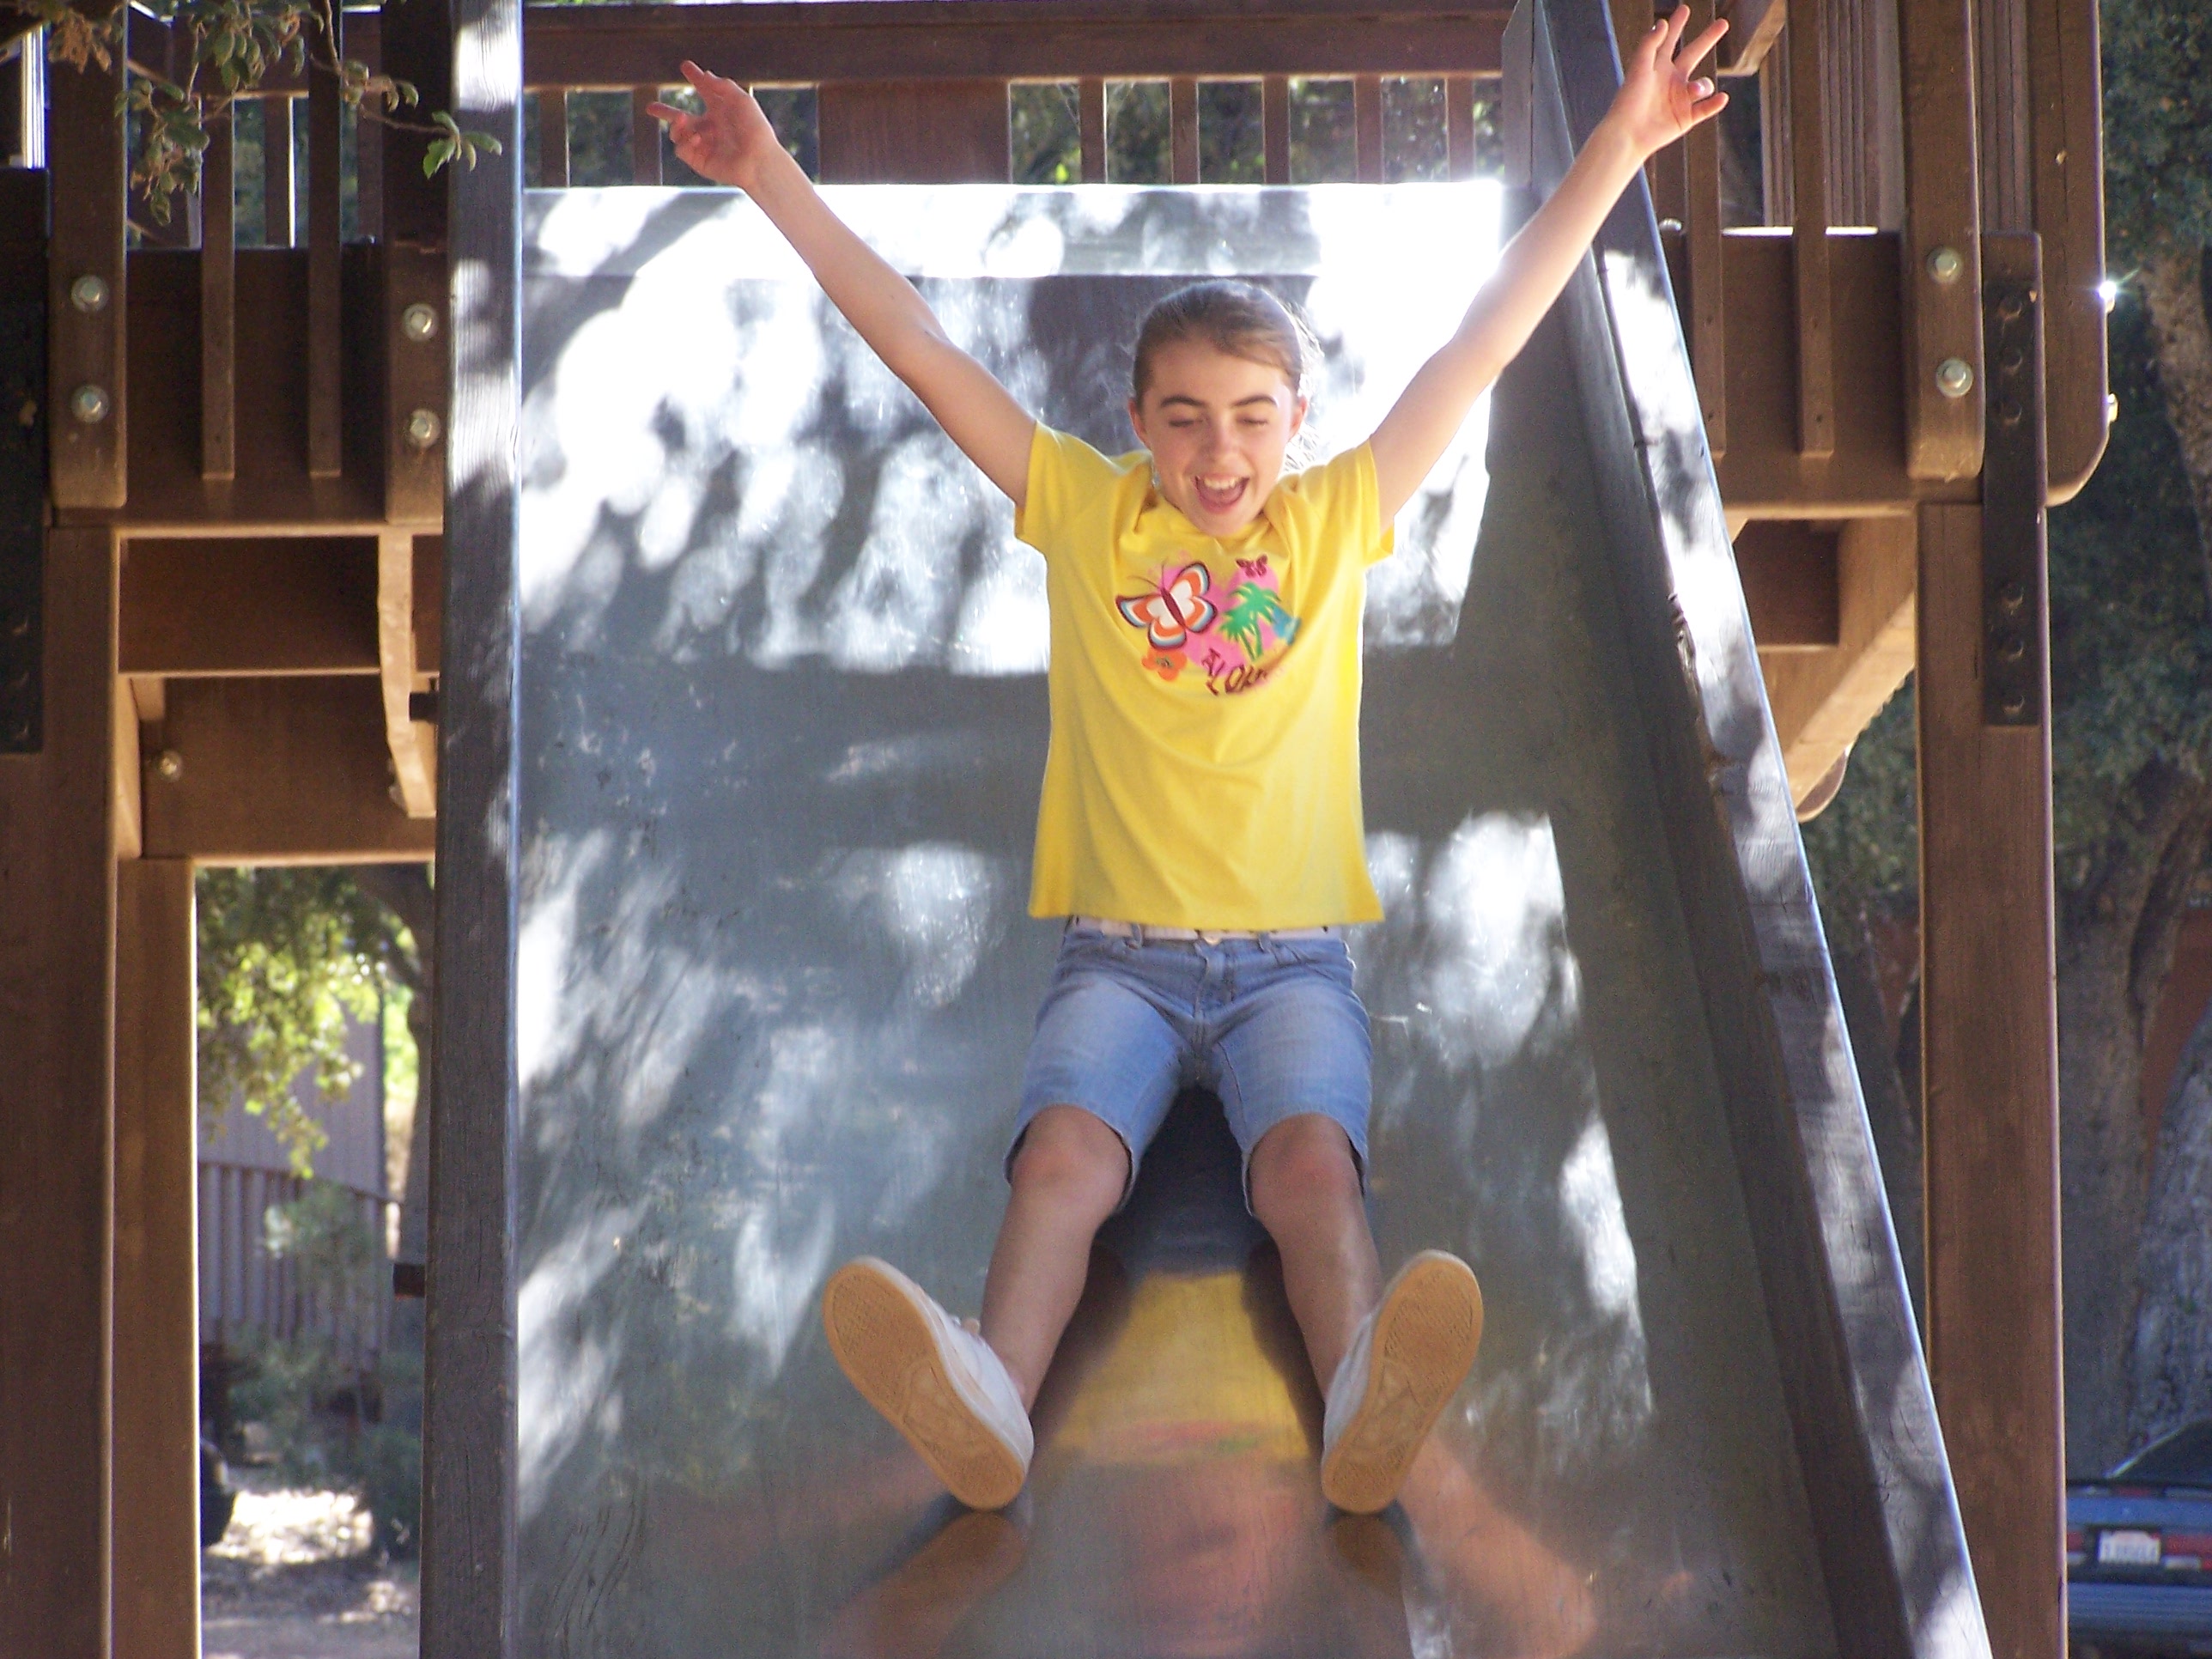 Girl sliding down treehouse slide with arms in the air